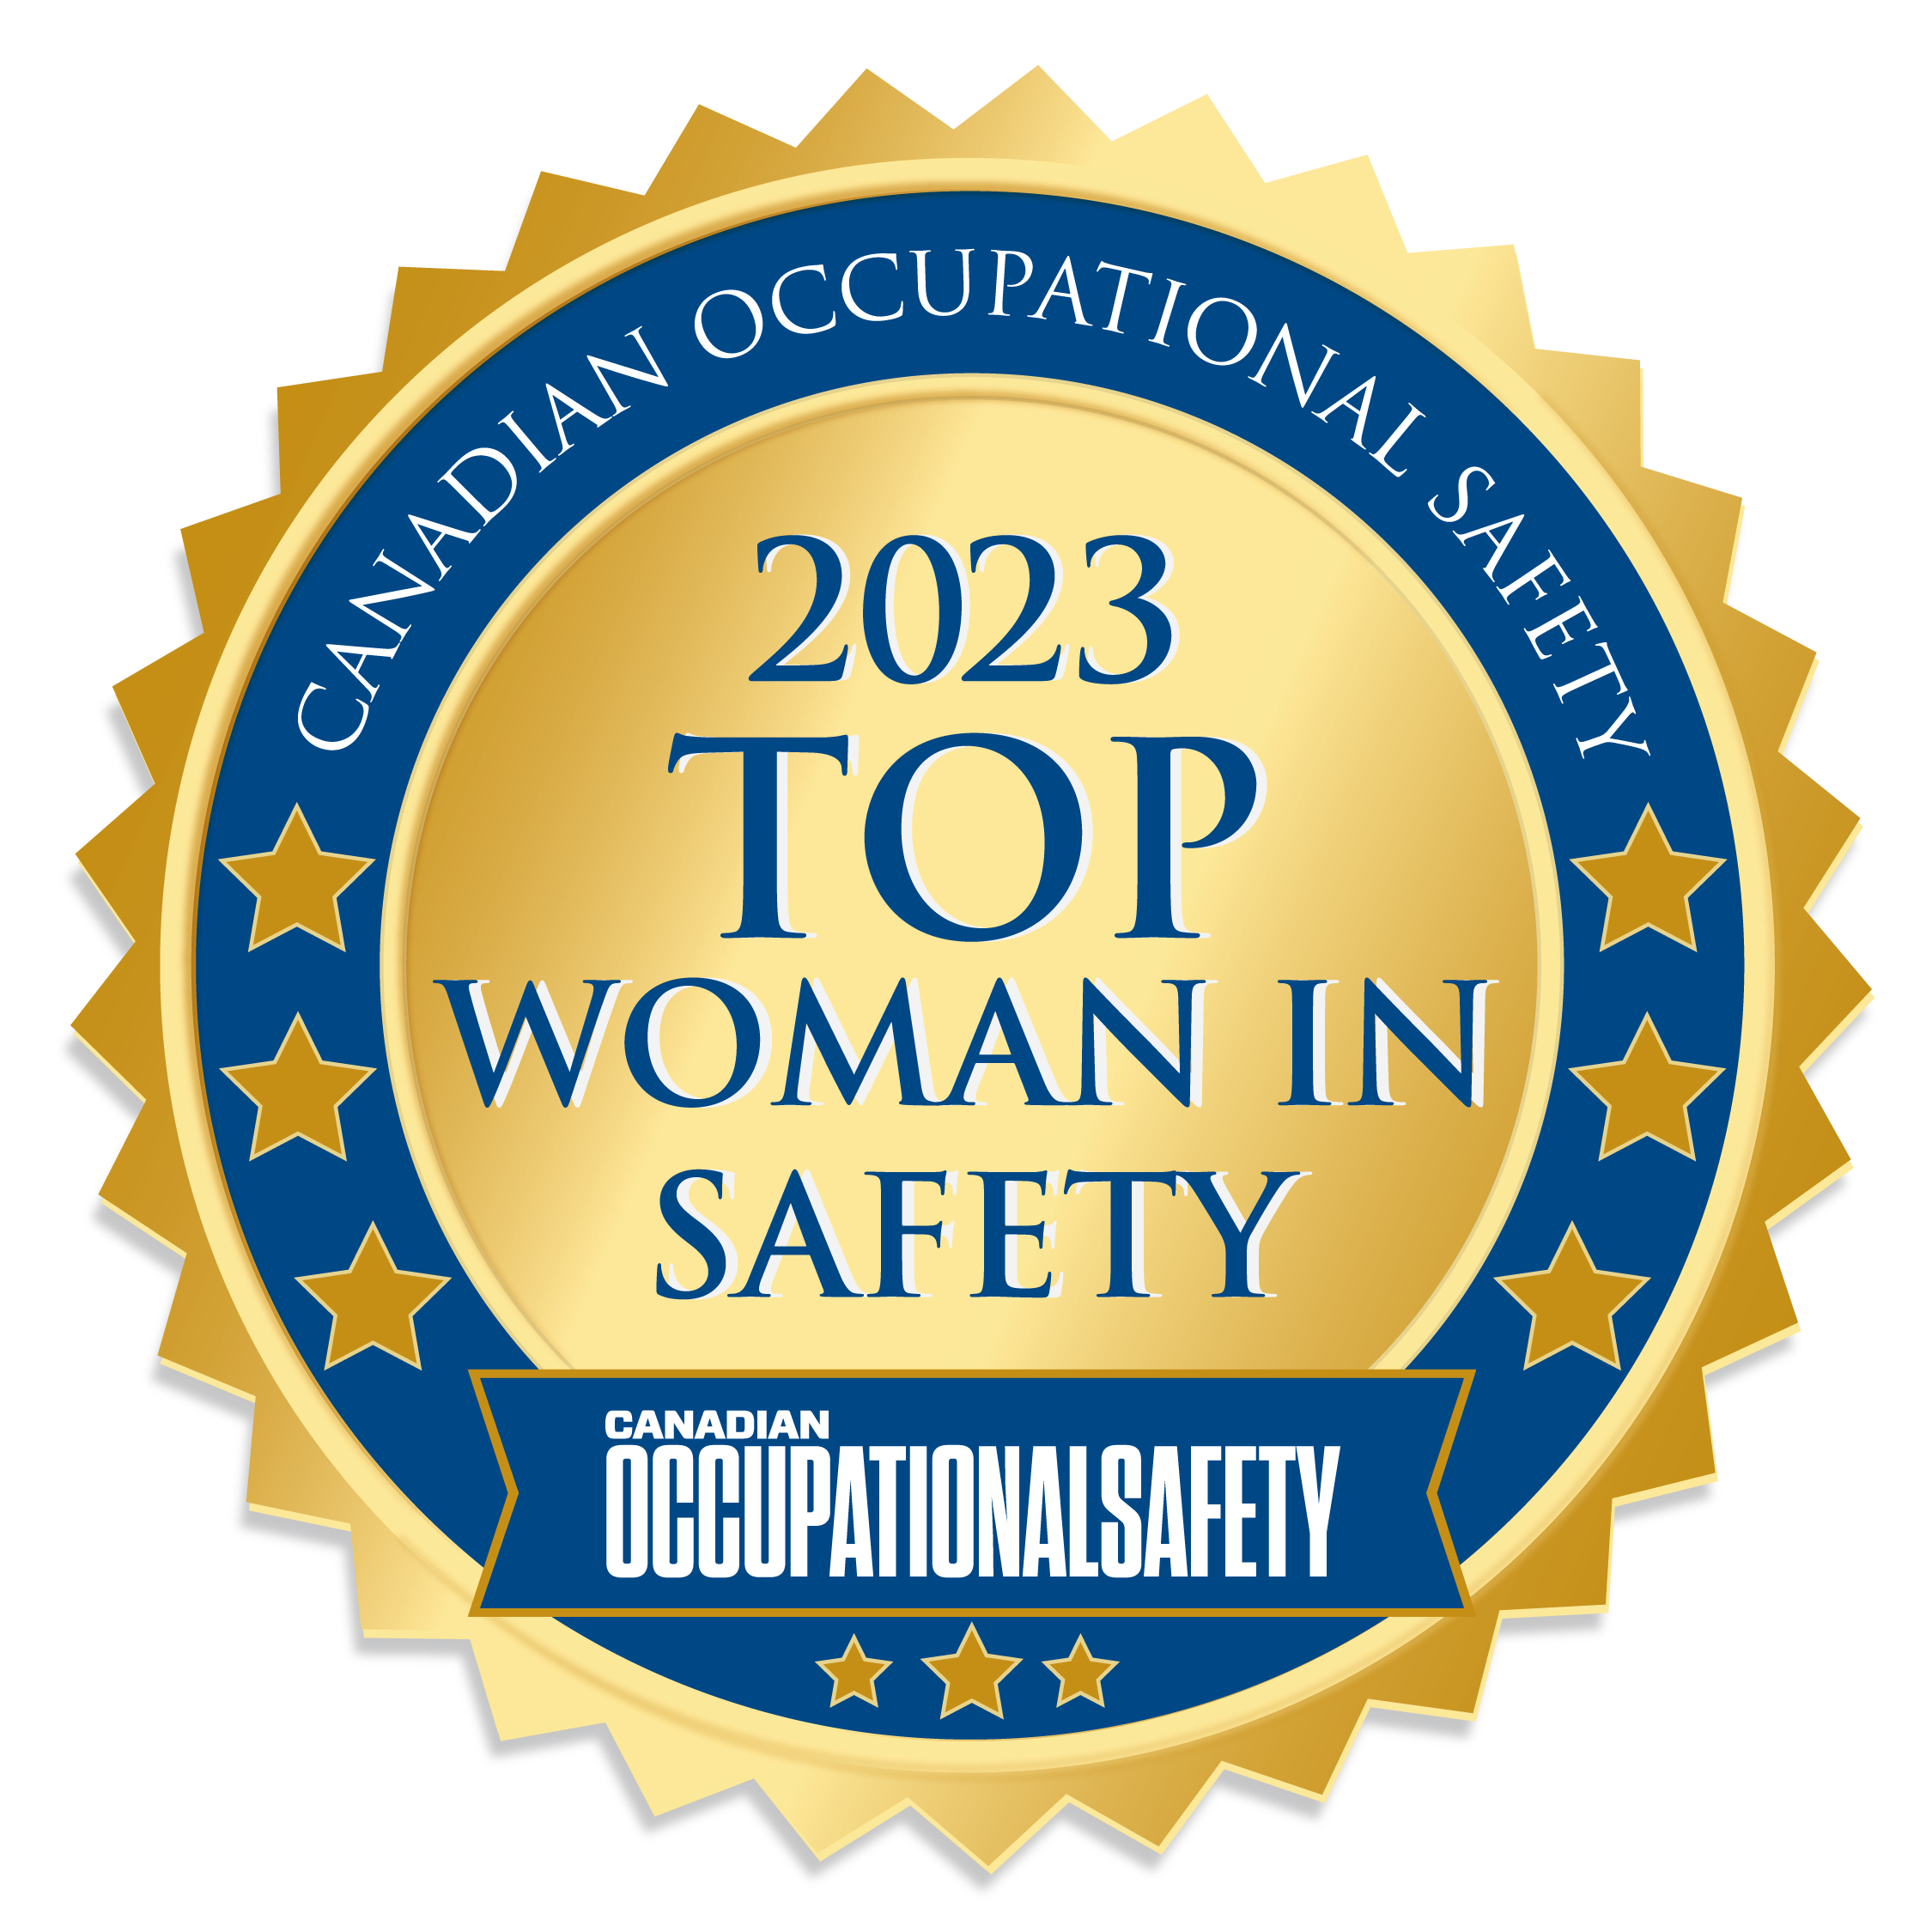 Top Woman in Safety 2023_logo